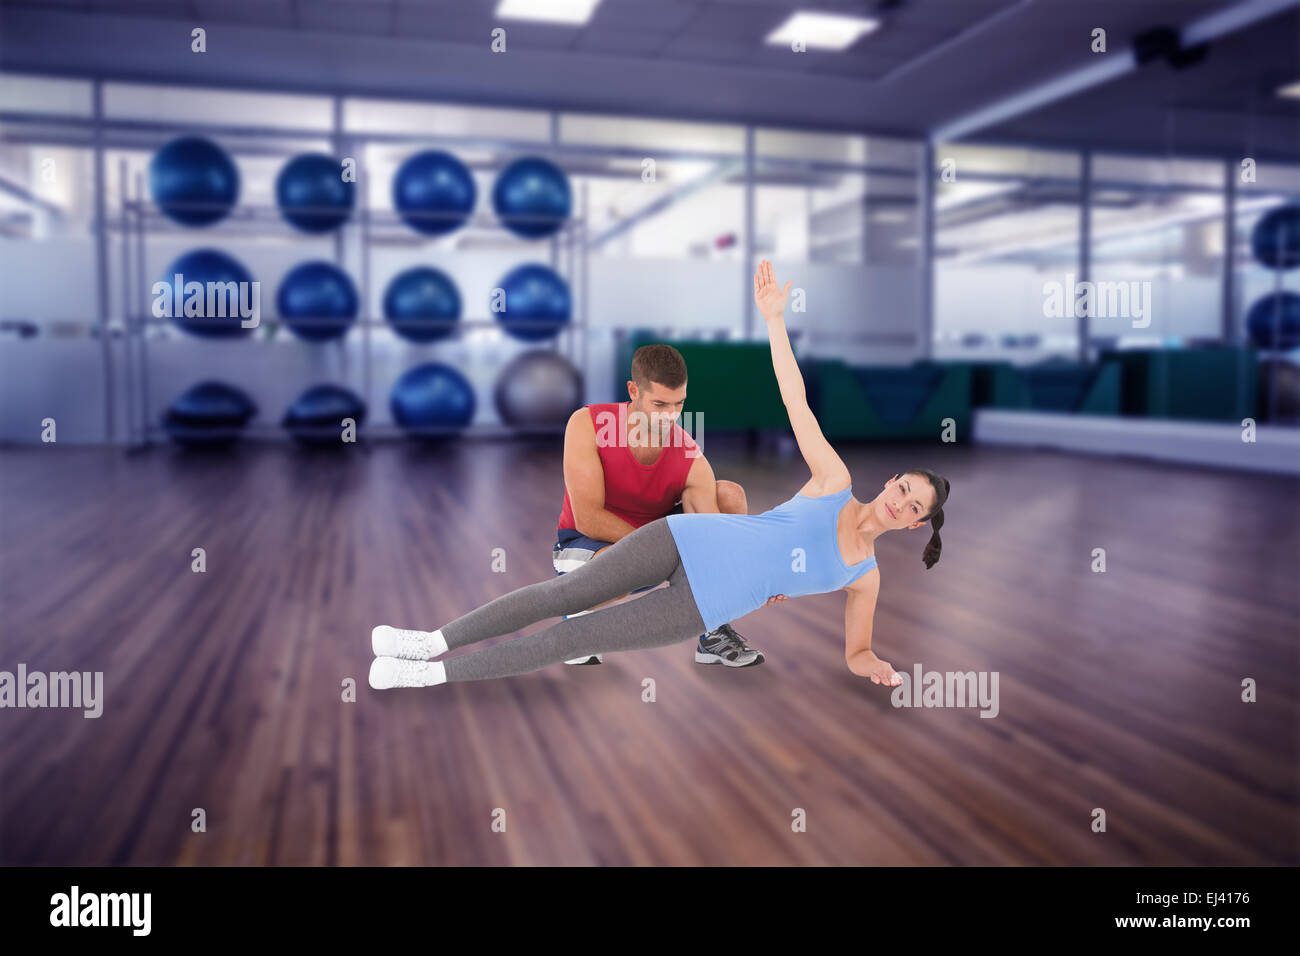 Composite image of personal trainer with client Stock Photo